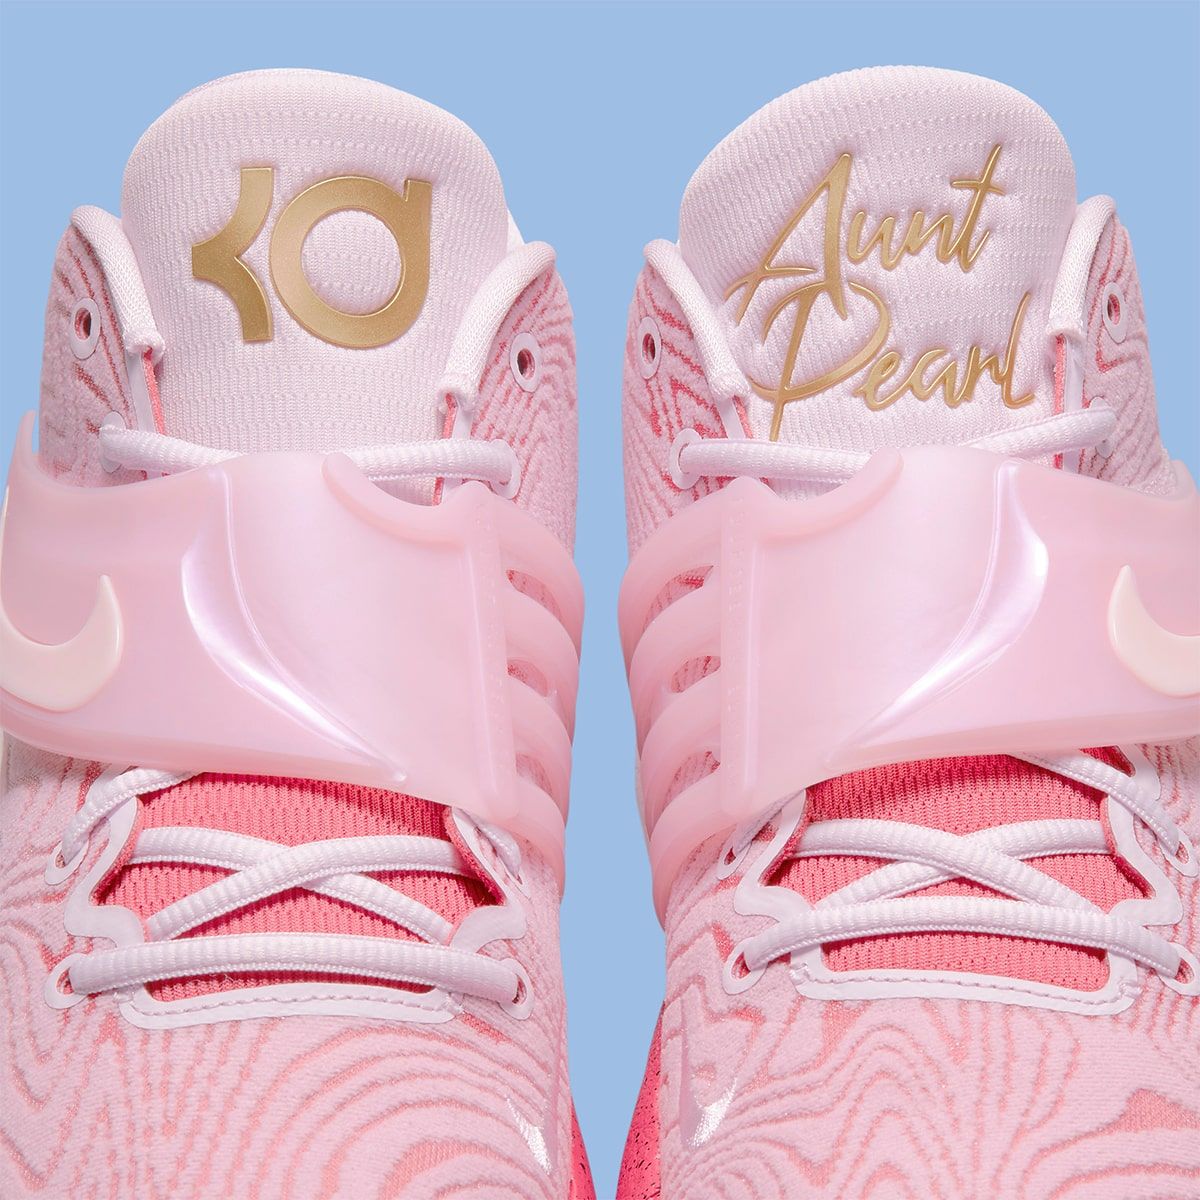 Available kd 14 navy Now // Nike KD 14 “Aunt Pearl” | HOUSE OF HEAT